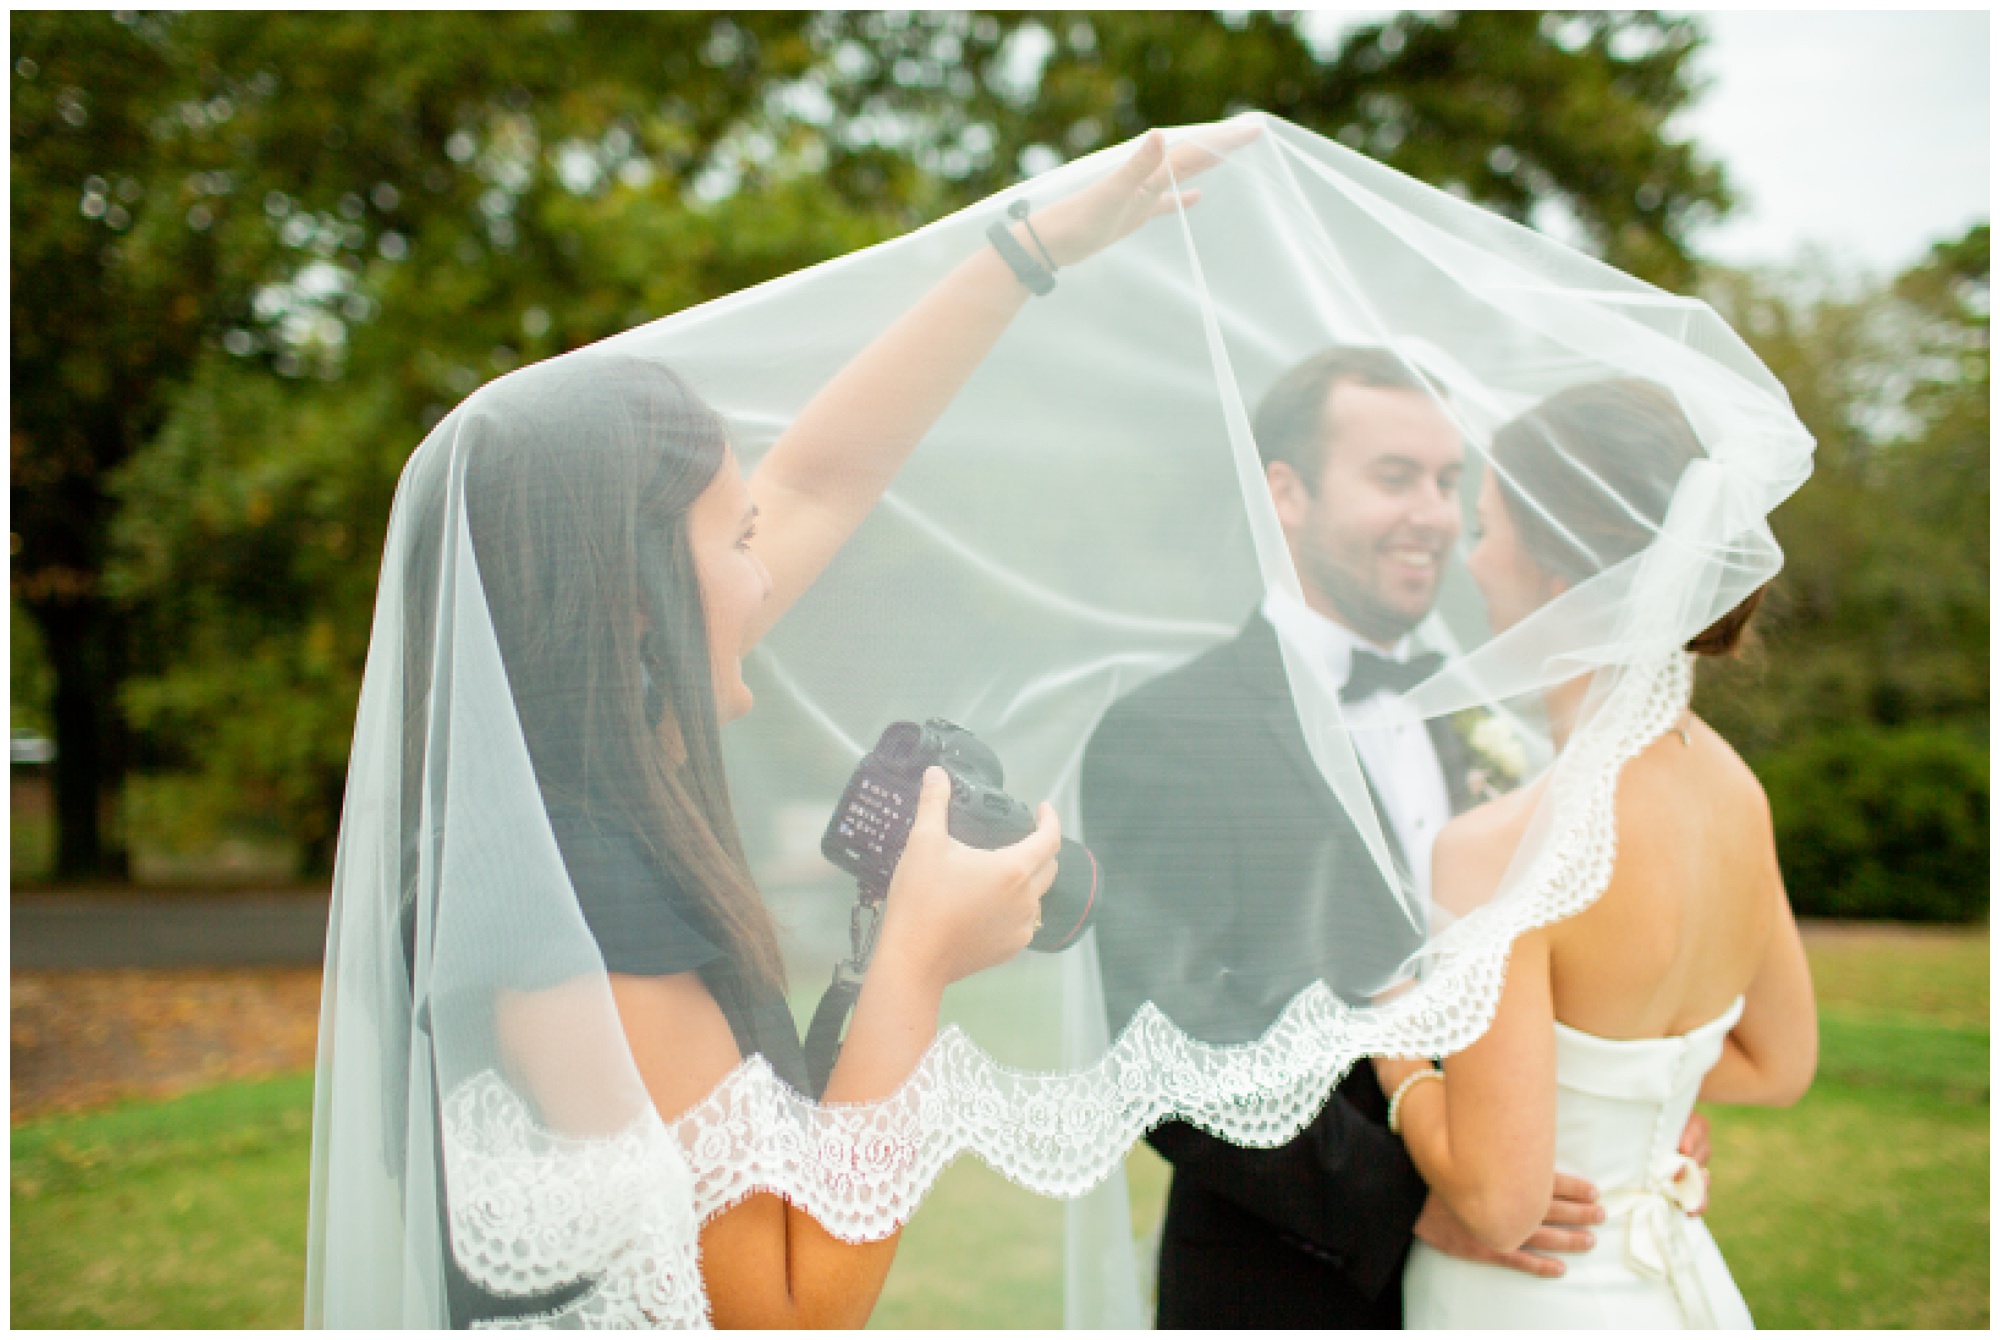 Have you ever been under a veil with a bride + groom? Find out more behind the scenes of 2019 weddings and sessions with Eleanor Stenner Photography!